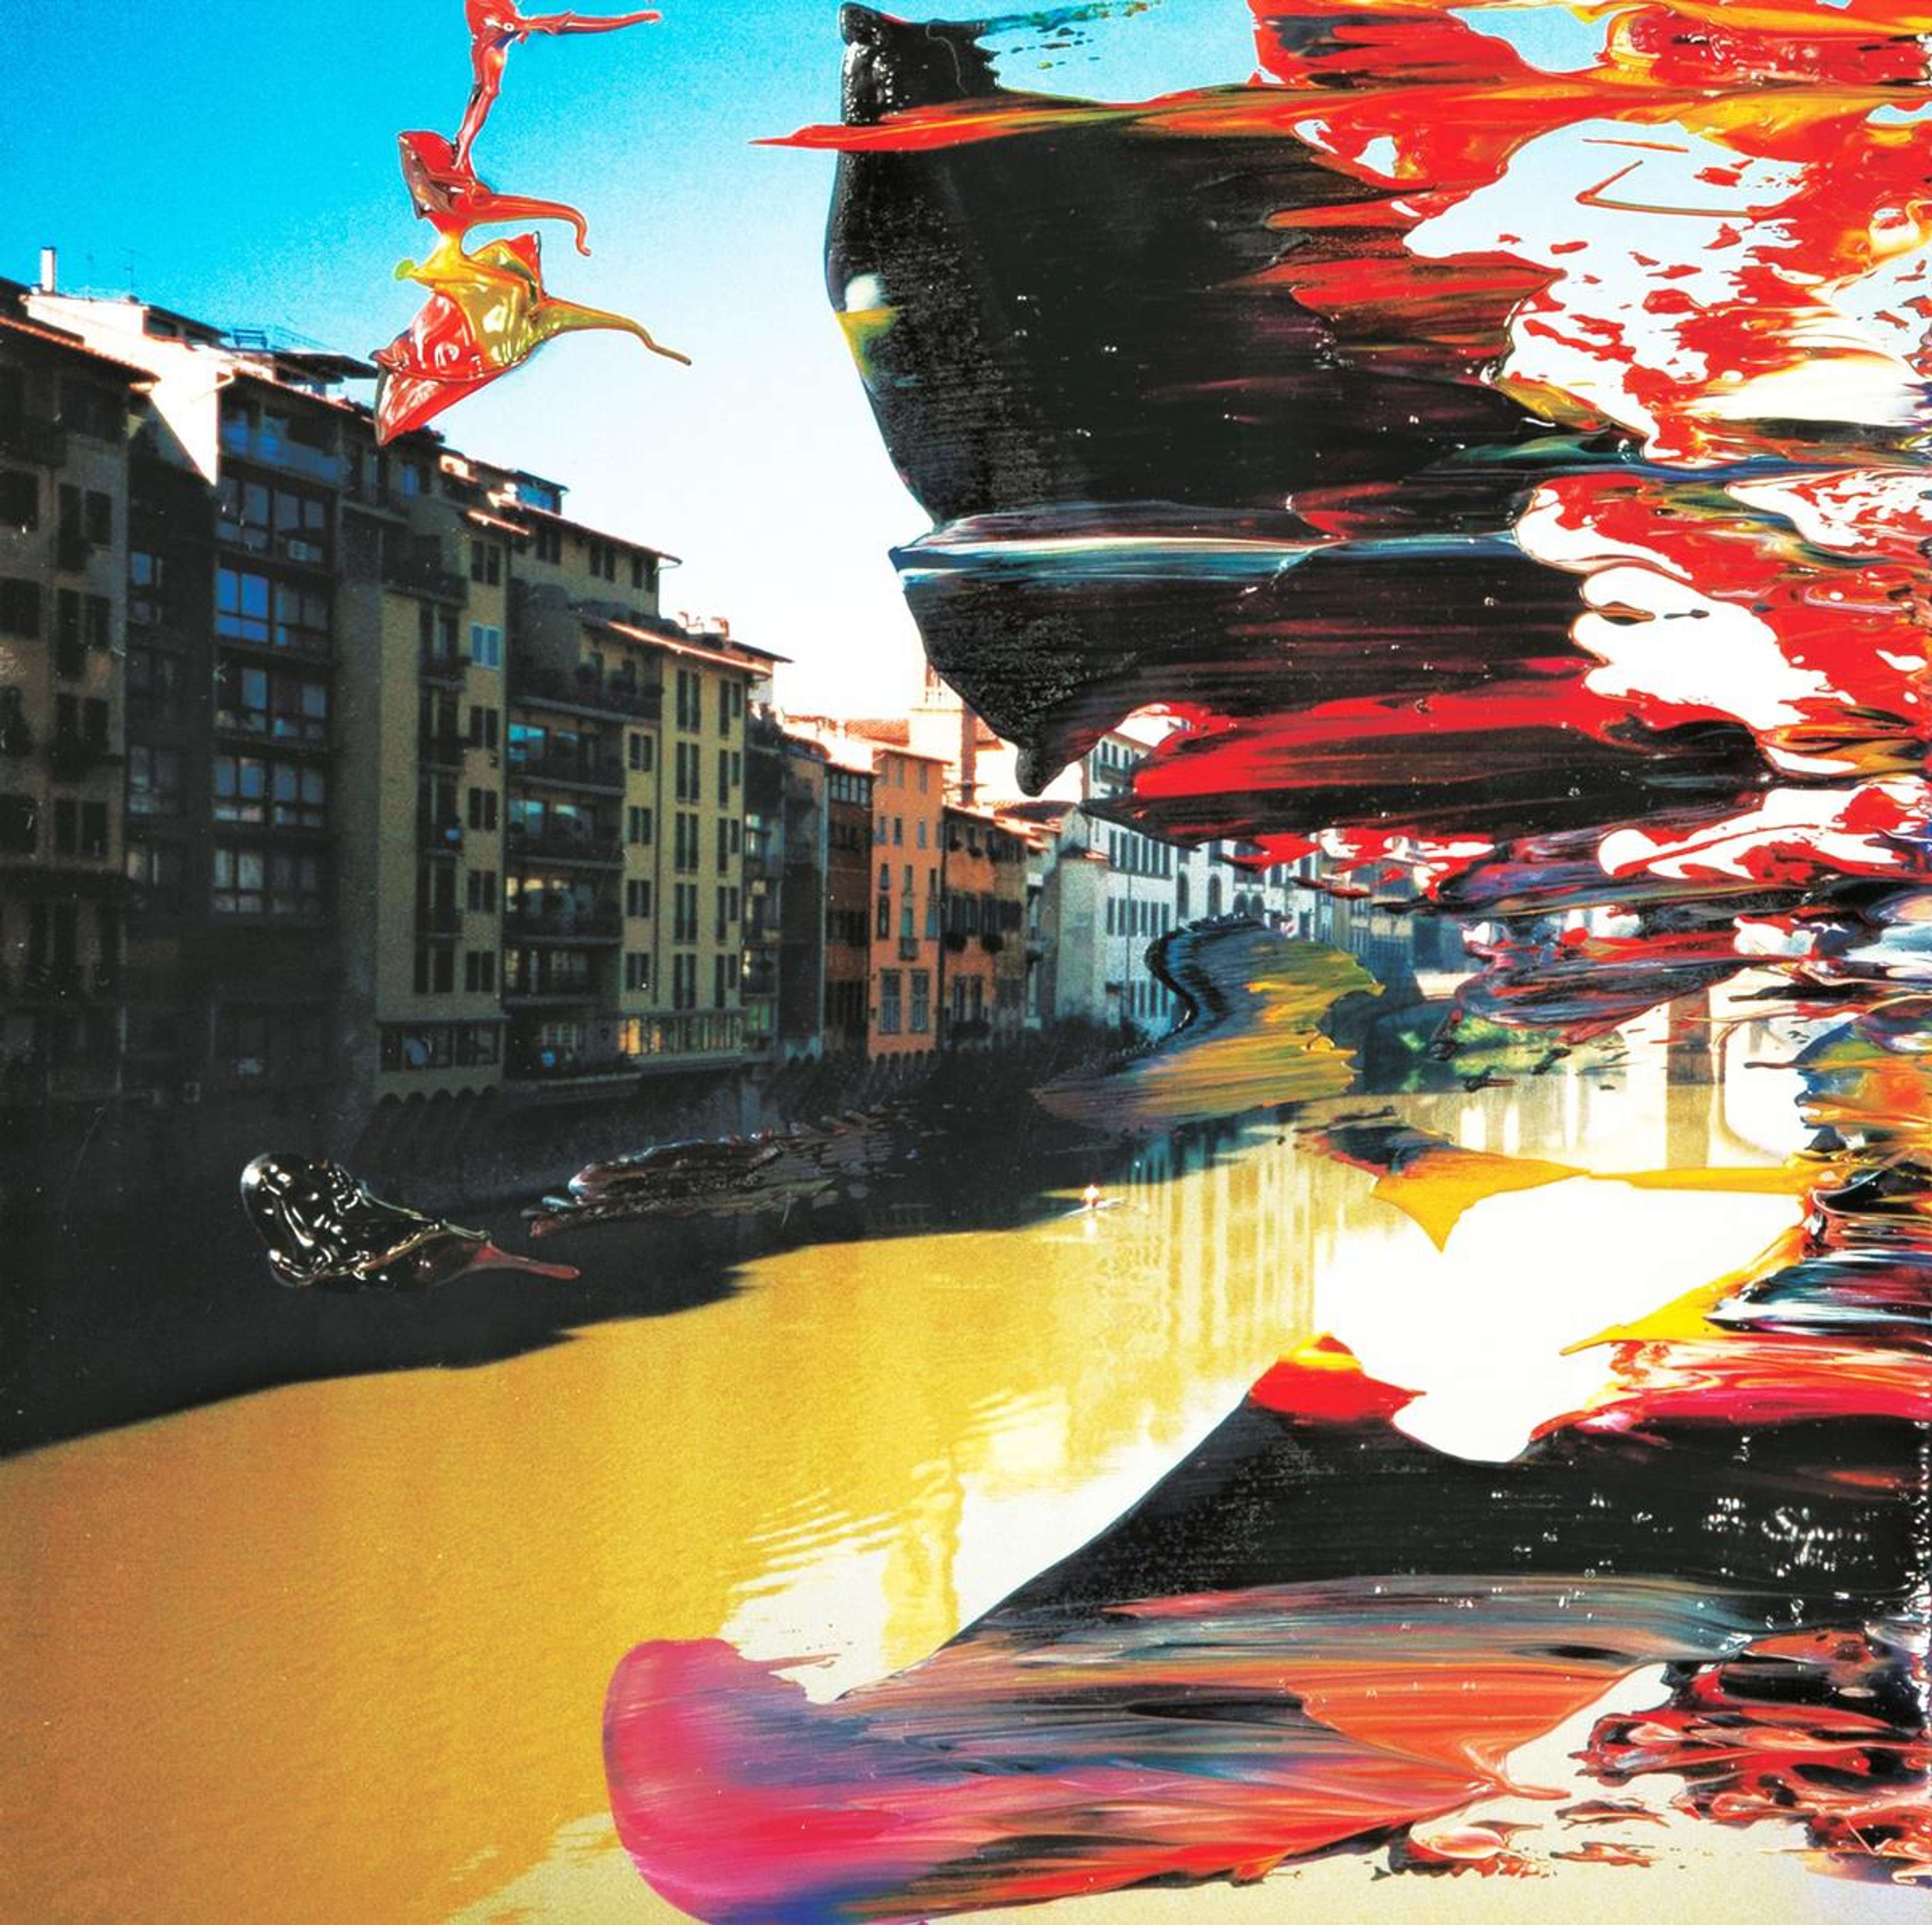 Chromogenic print by Gerhard Richter of the Arno River. The water is a mustard yellow colour, the buildings alongside the river are muted earthy tones and they stand under a bright blue sky. On the right hand side of the picture plane, oil paint in pink, red, orange, blue and black are smeared across the print, with the paint's colours merging together.